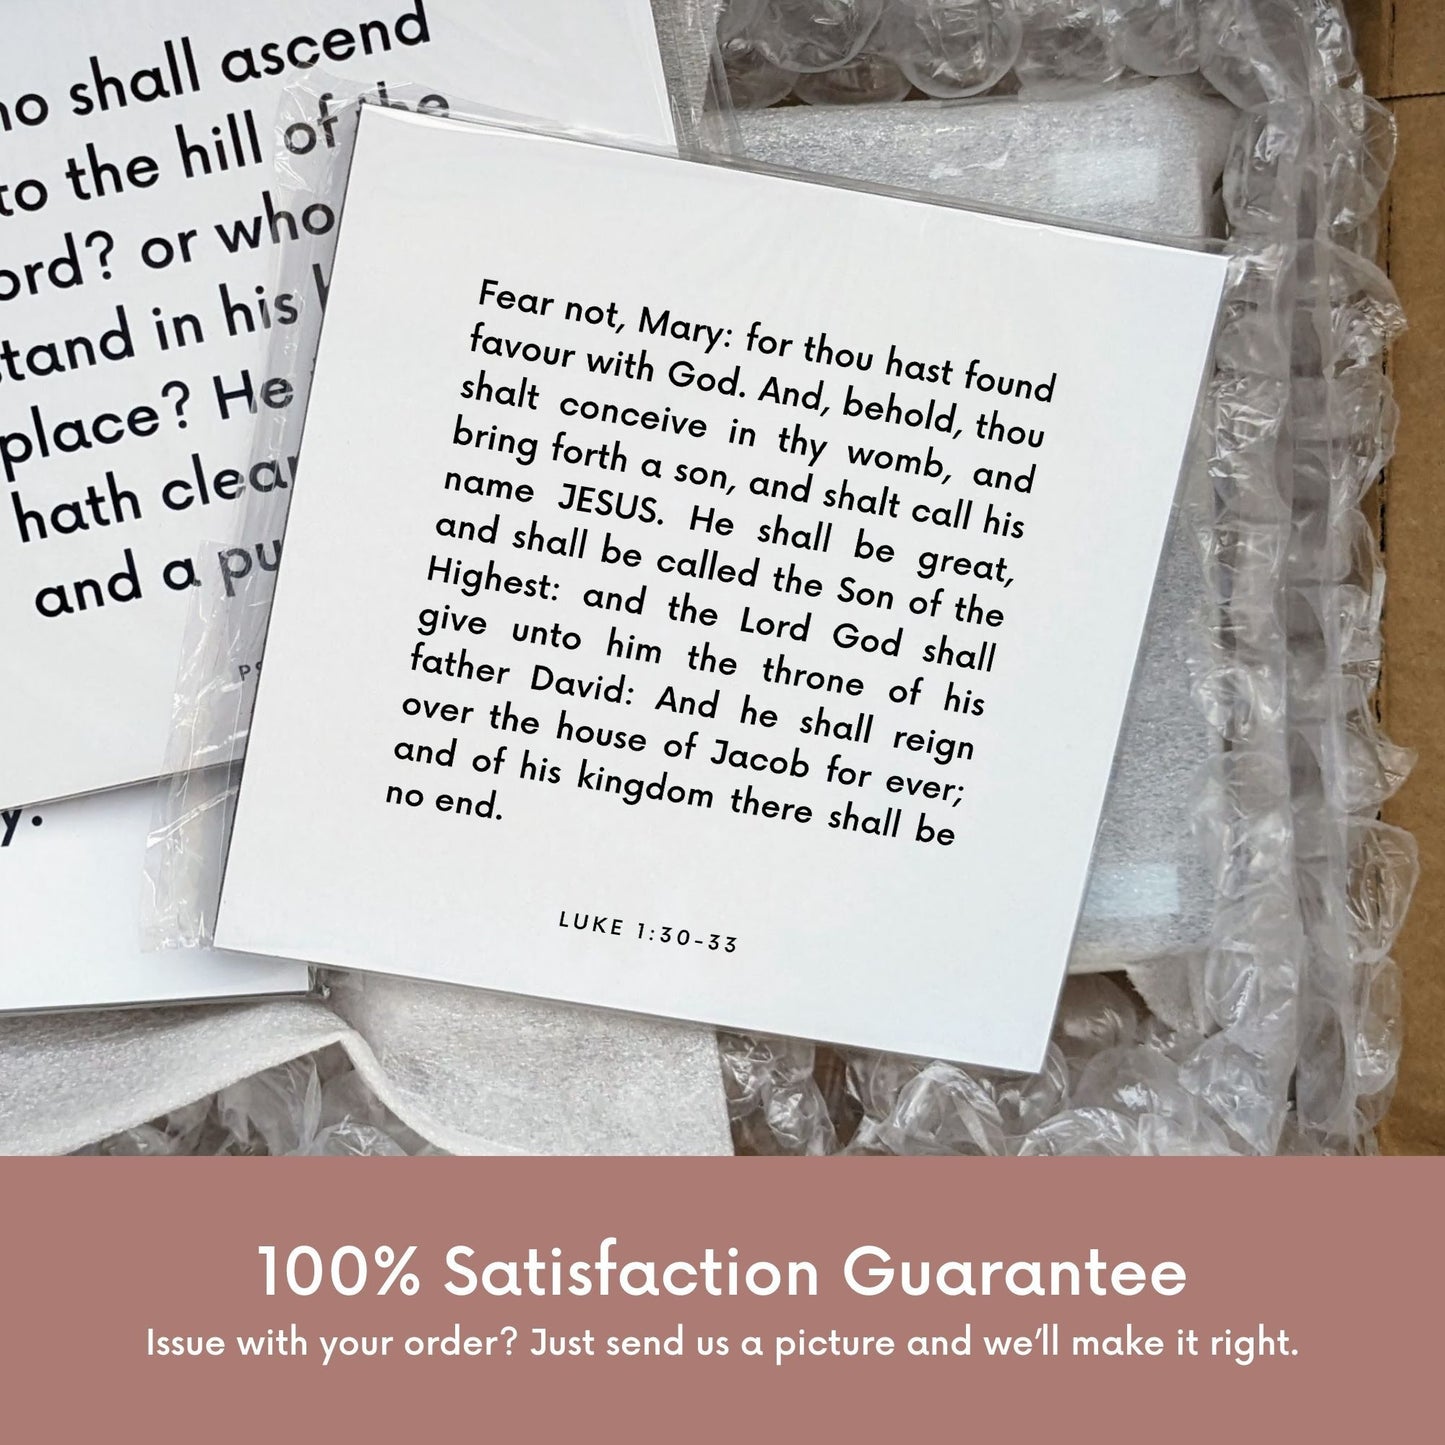 Shipping materials for scripture tile of Luke 1:30-33 - "Fear not, Mary: for thou hast found favour with God"